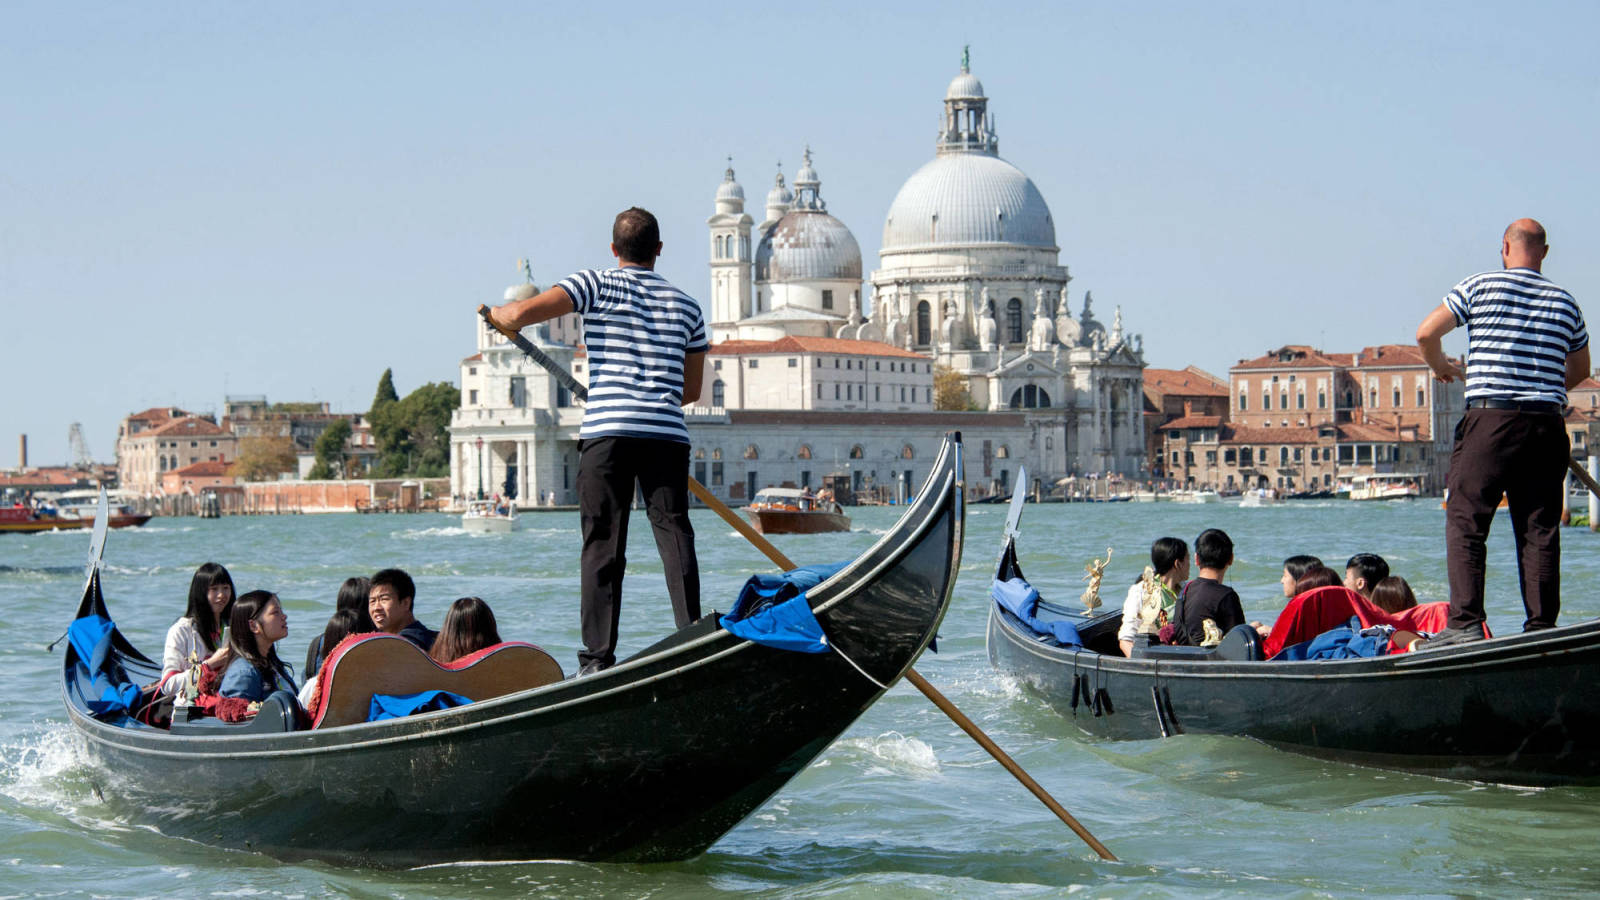 15 things you must do in Venice, Italy | Yardbarker